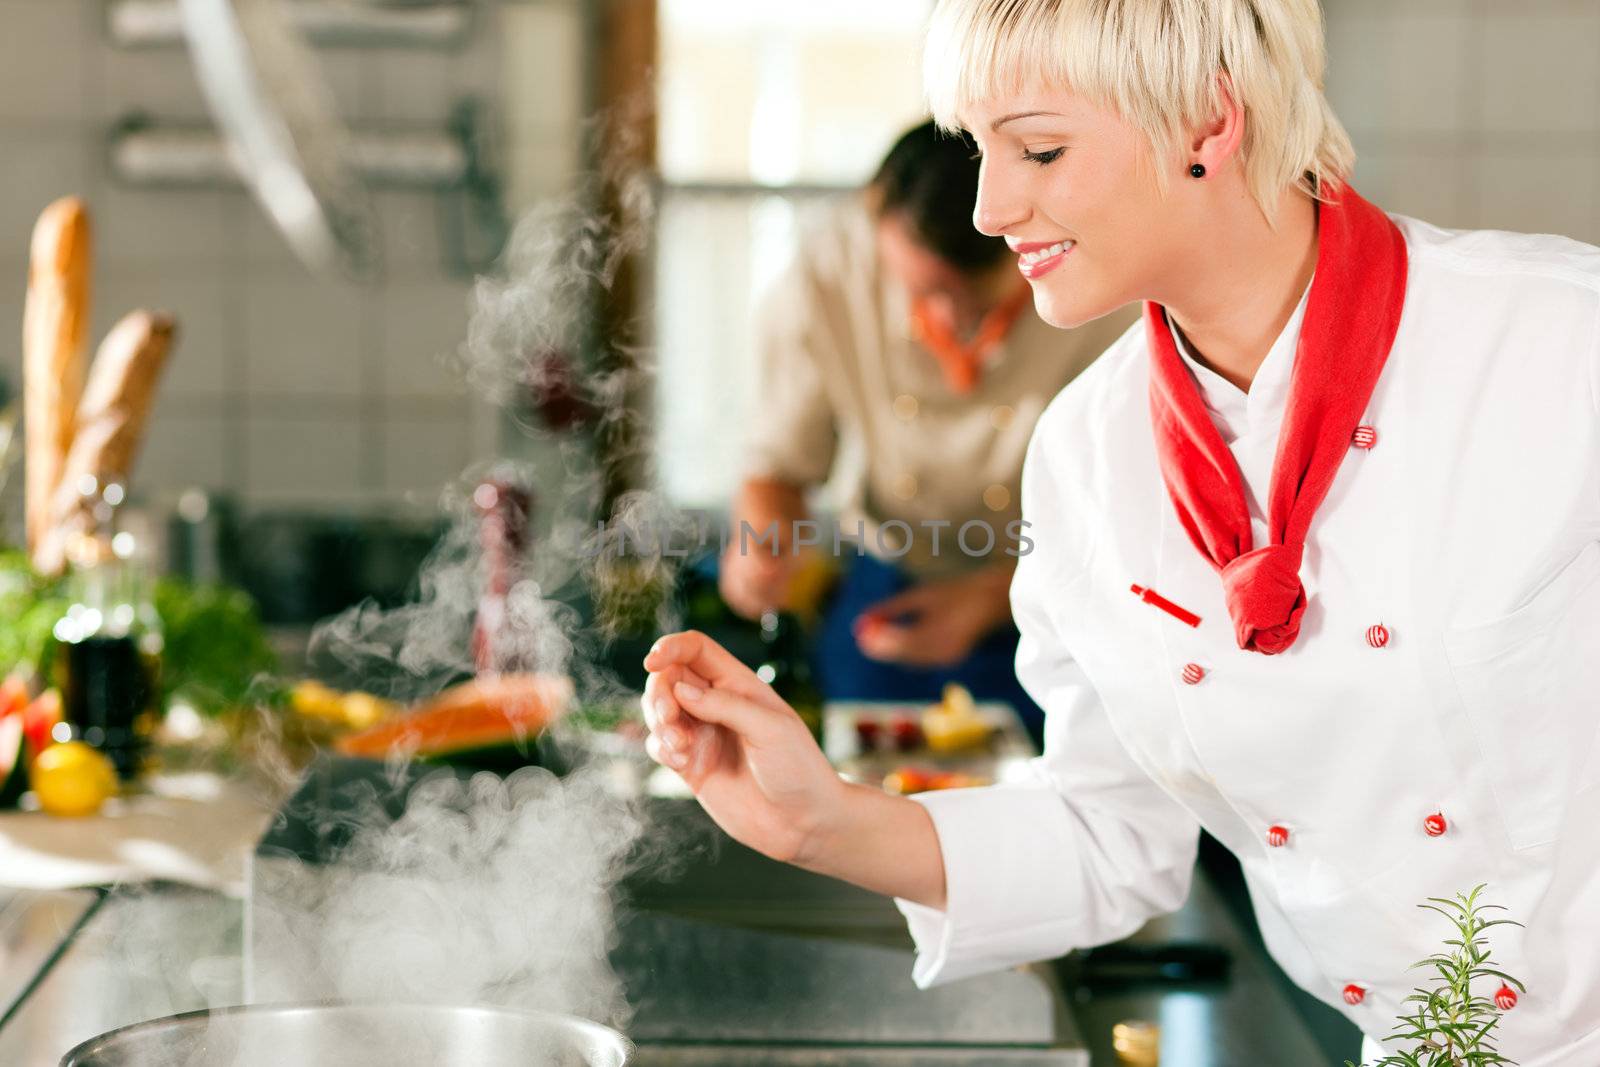 Two chefs in teamwork - man and woman - in a restaurant or hotel kitchen cooking delicious food